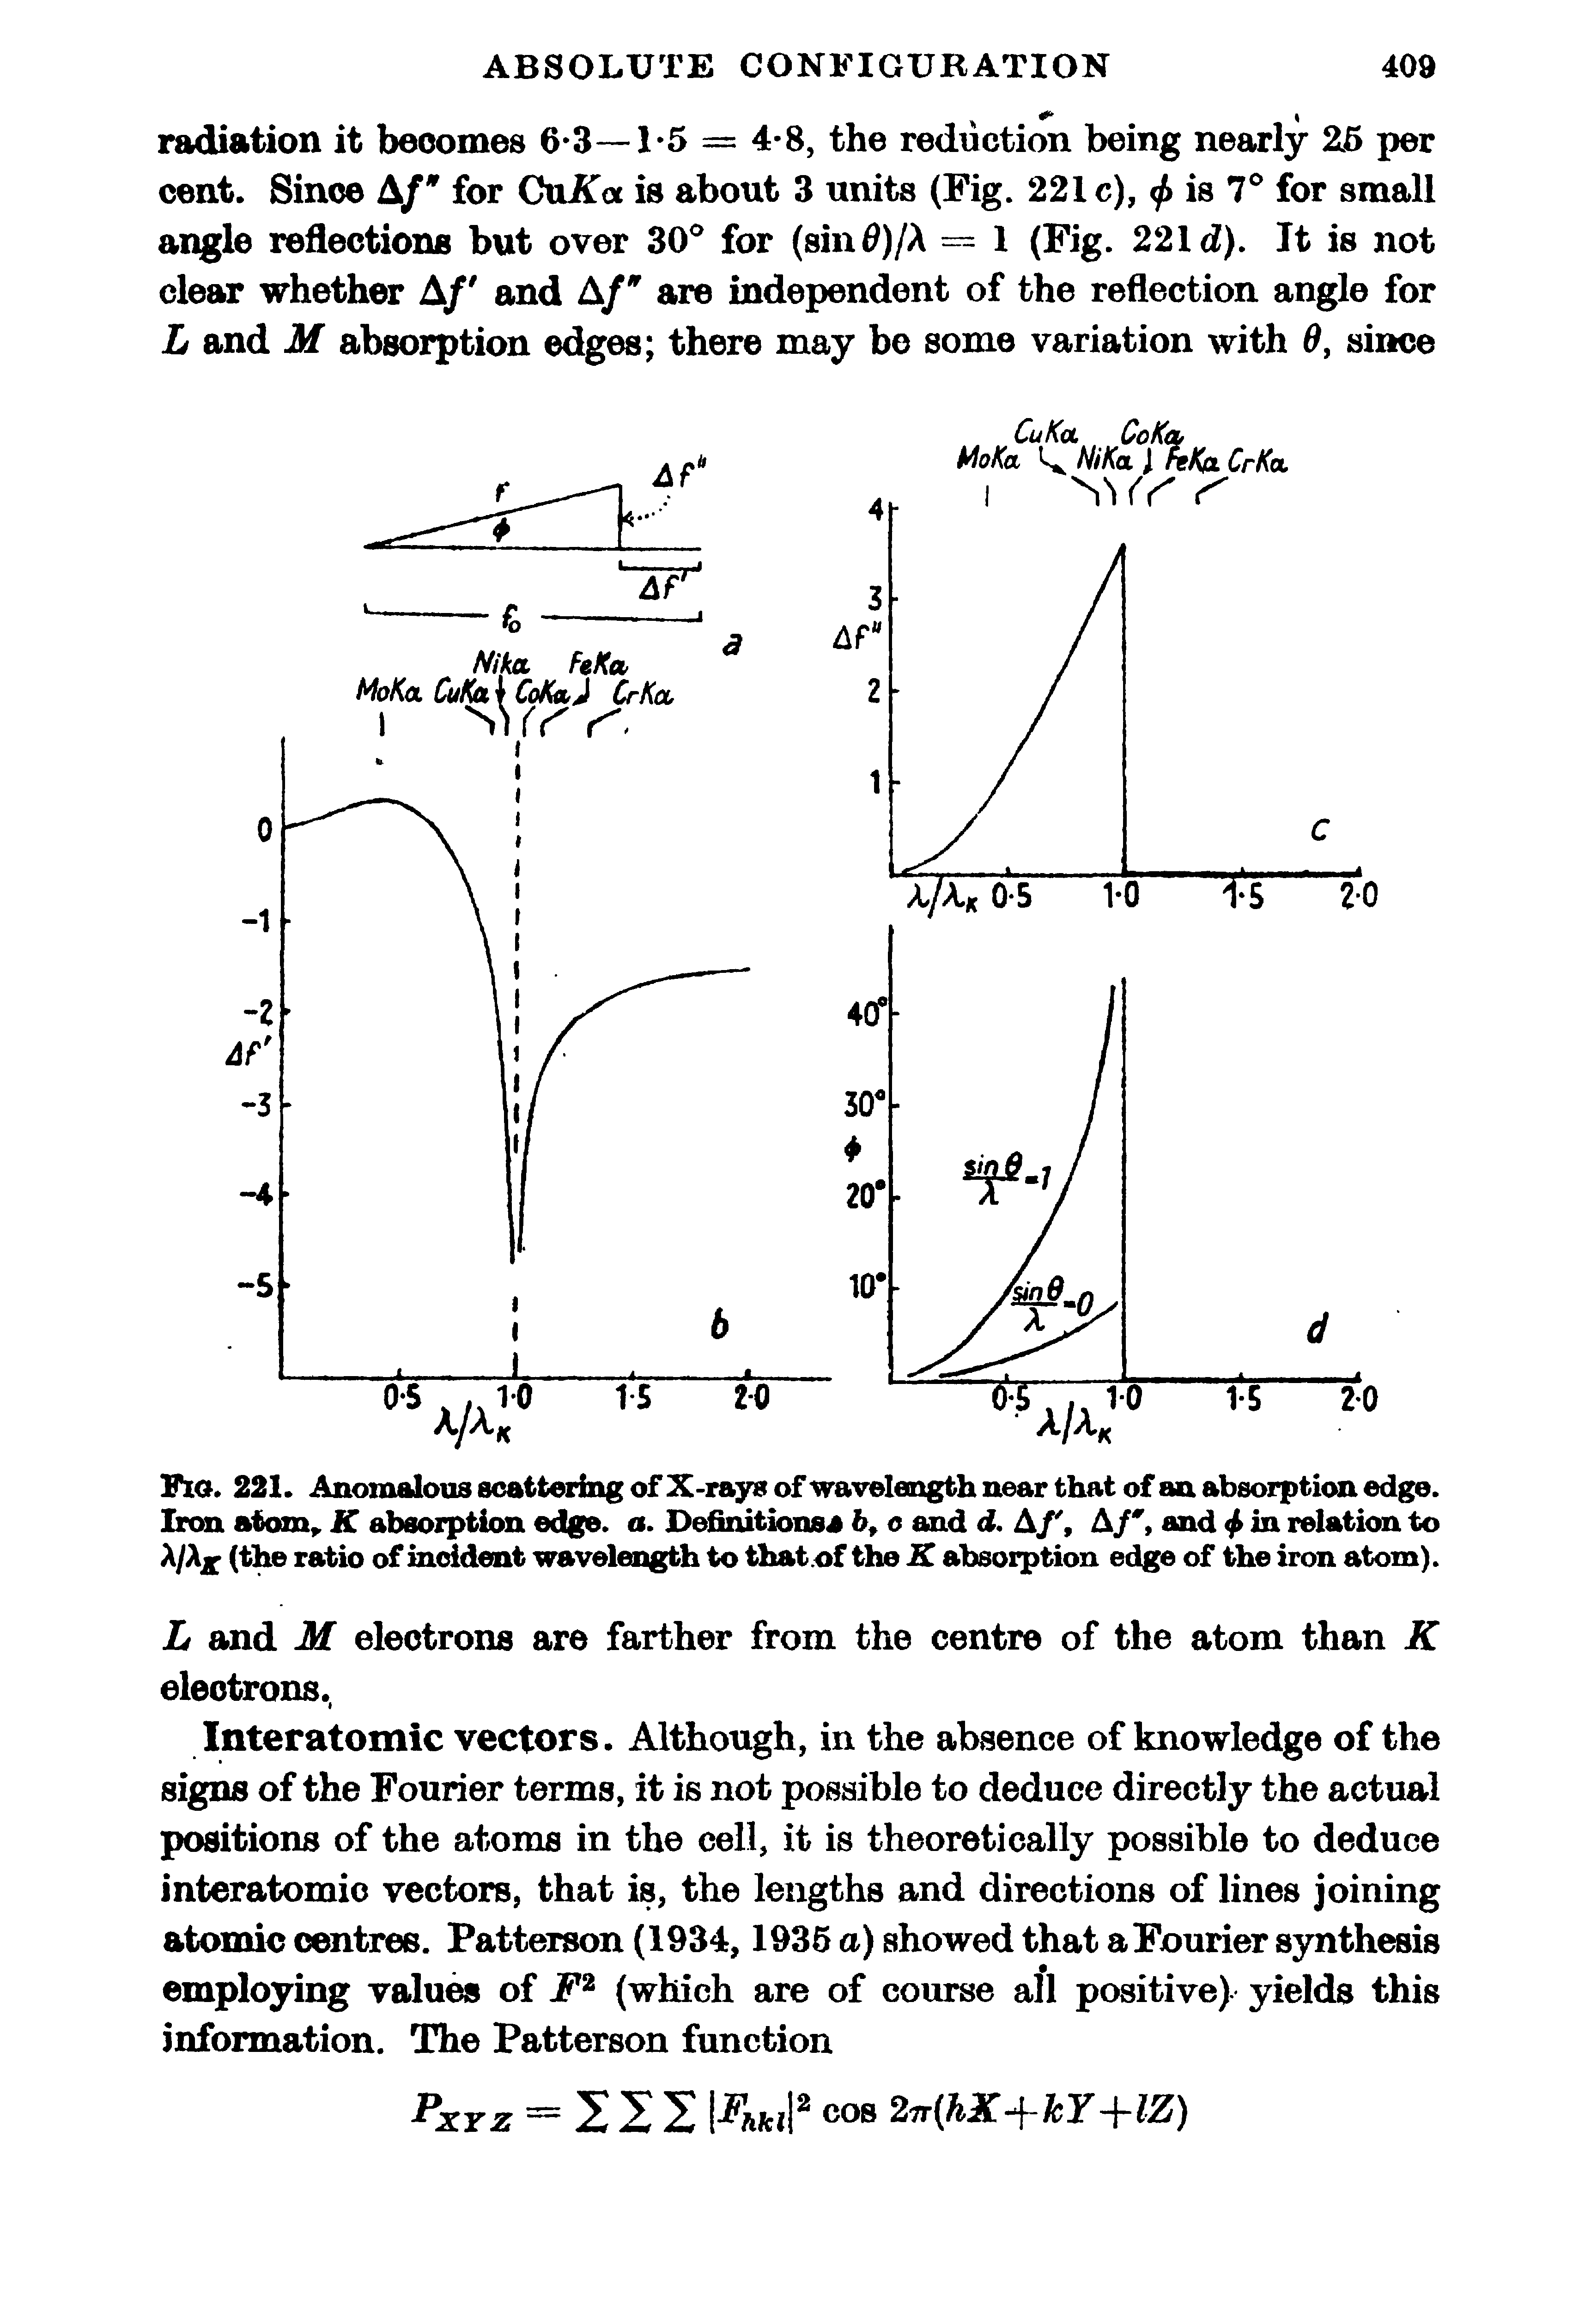 Fig. 221. Anomalous scattering of X-rays of wavelength near that of an absorption edge. Iron atom,. K absorption edge, a. Definitions4 6, o and d. A/, A/, and 4 in relation to A/Ajp (the ratio of incident wavelength to that. of the K absorption edge of the iron atom).